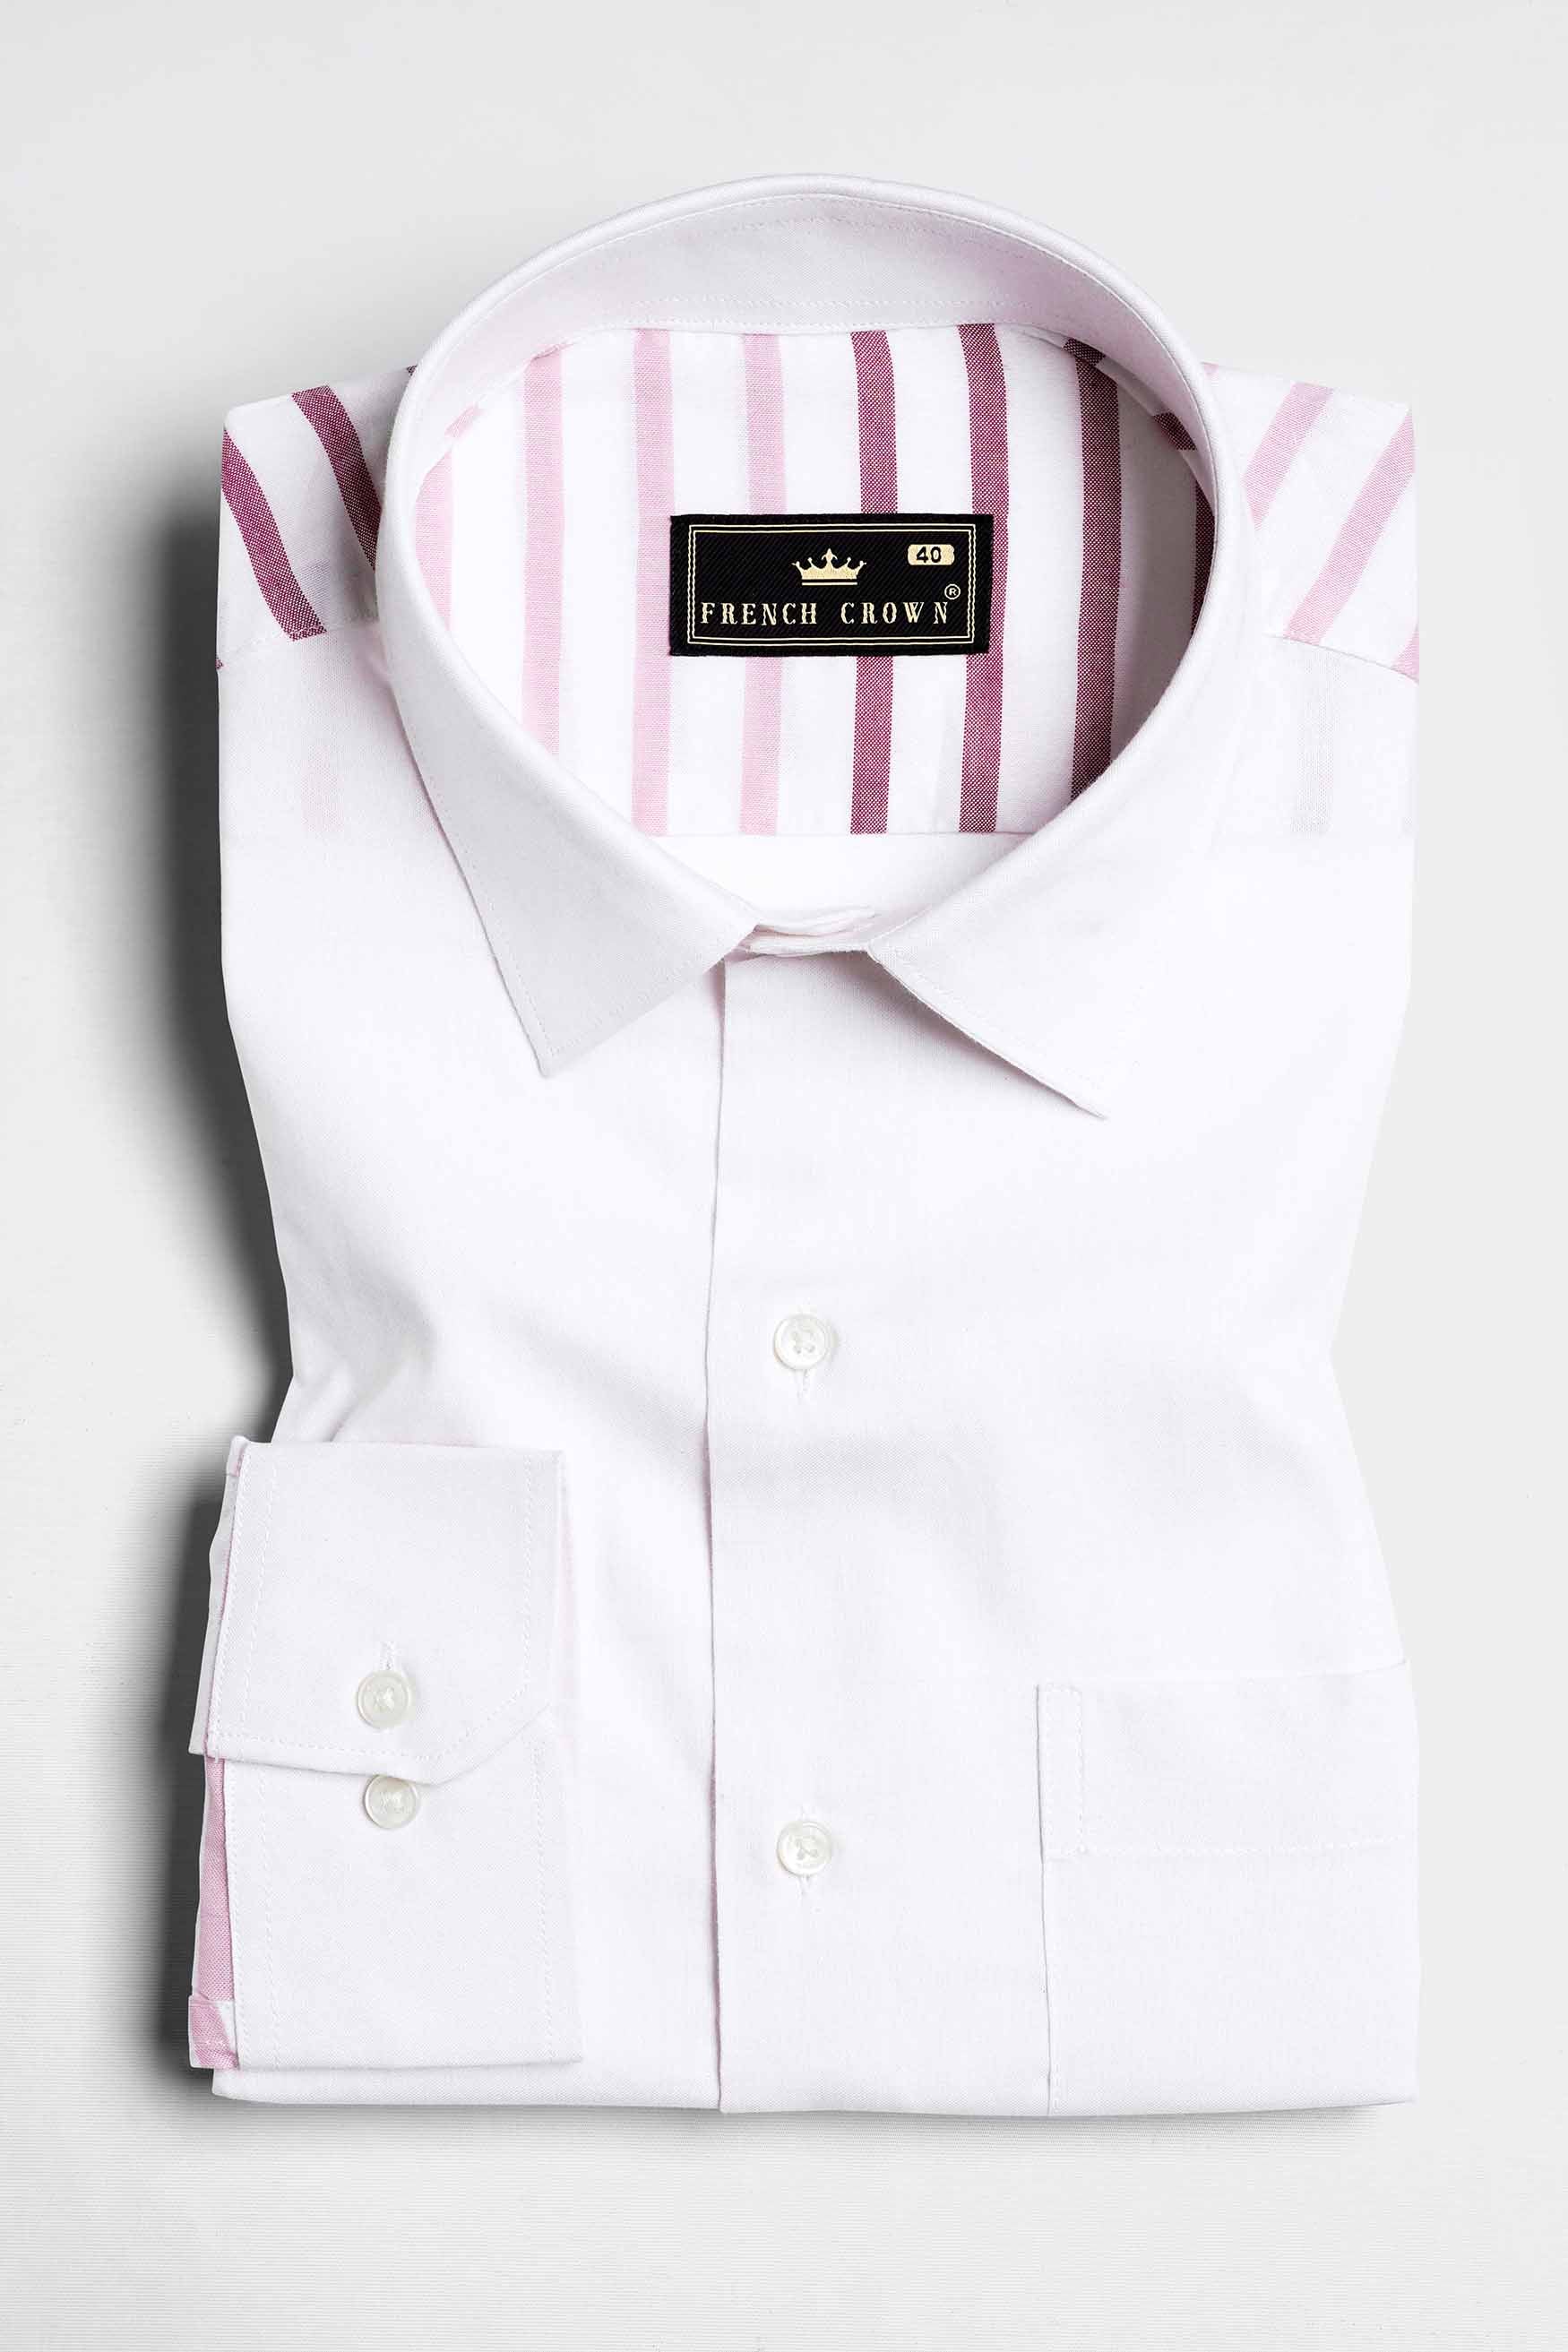 Bright White with Bashful Pink Striped Royal Oxford Shirt11624-WCC-38, 11624-WCC-H-38, 11624-WCC-39, 11624-WCC-H-39, 11624-WCC-40, 11624-WCC-H-40, 11624-WCC-42, 11624-WCC-H-42, 11624-WCC-44, 11624-WCC-H-44, 11624-WCC-46, 11624-WCC-H-46, 11624-WCC-48, 11624-WCC-H-48, 11624-WCC-50, 11624-WCC-H-50, 11624-WCC-52, 11624-WCC-H-52